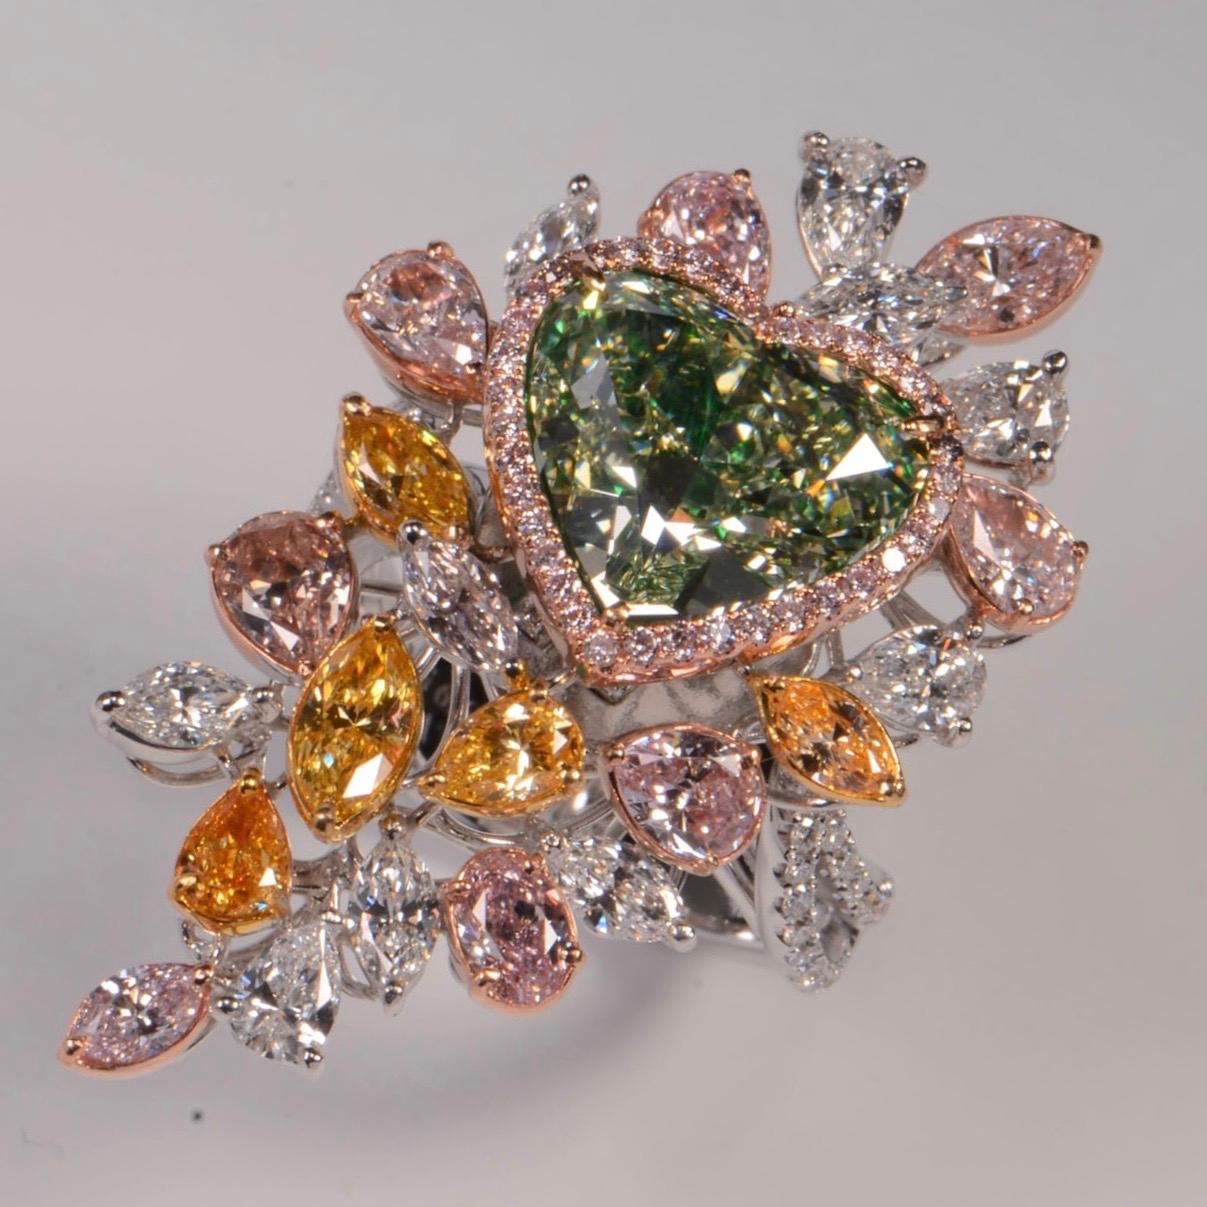 From the Emilio Jewelry Museum Vault, We are proudly Showcasing a Gia certified Natural Fancy yellow green heart shaped diamond in the center. The diamond is exceptional and clean. We can easily redesign this to a simple everyday ring. 
This piece